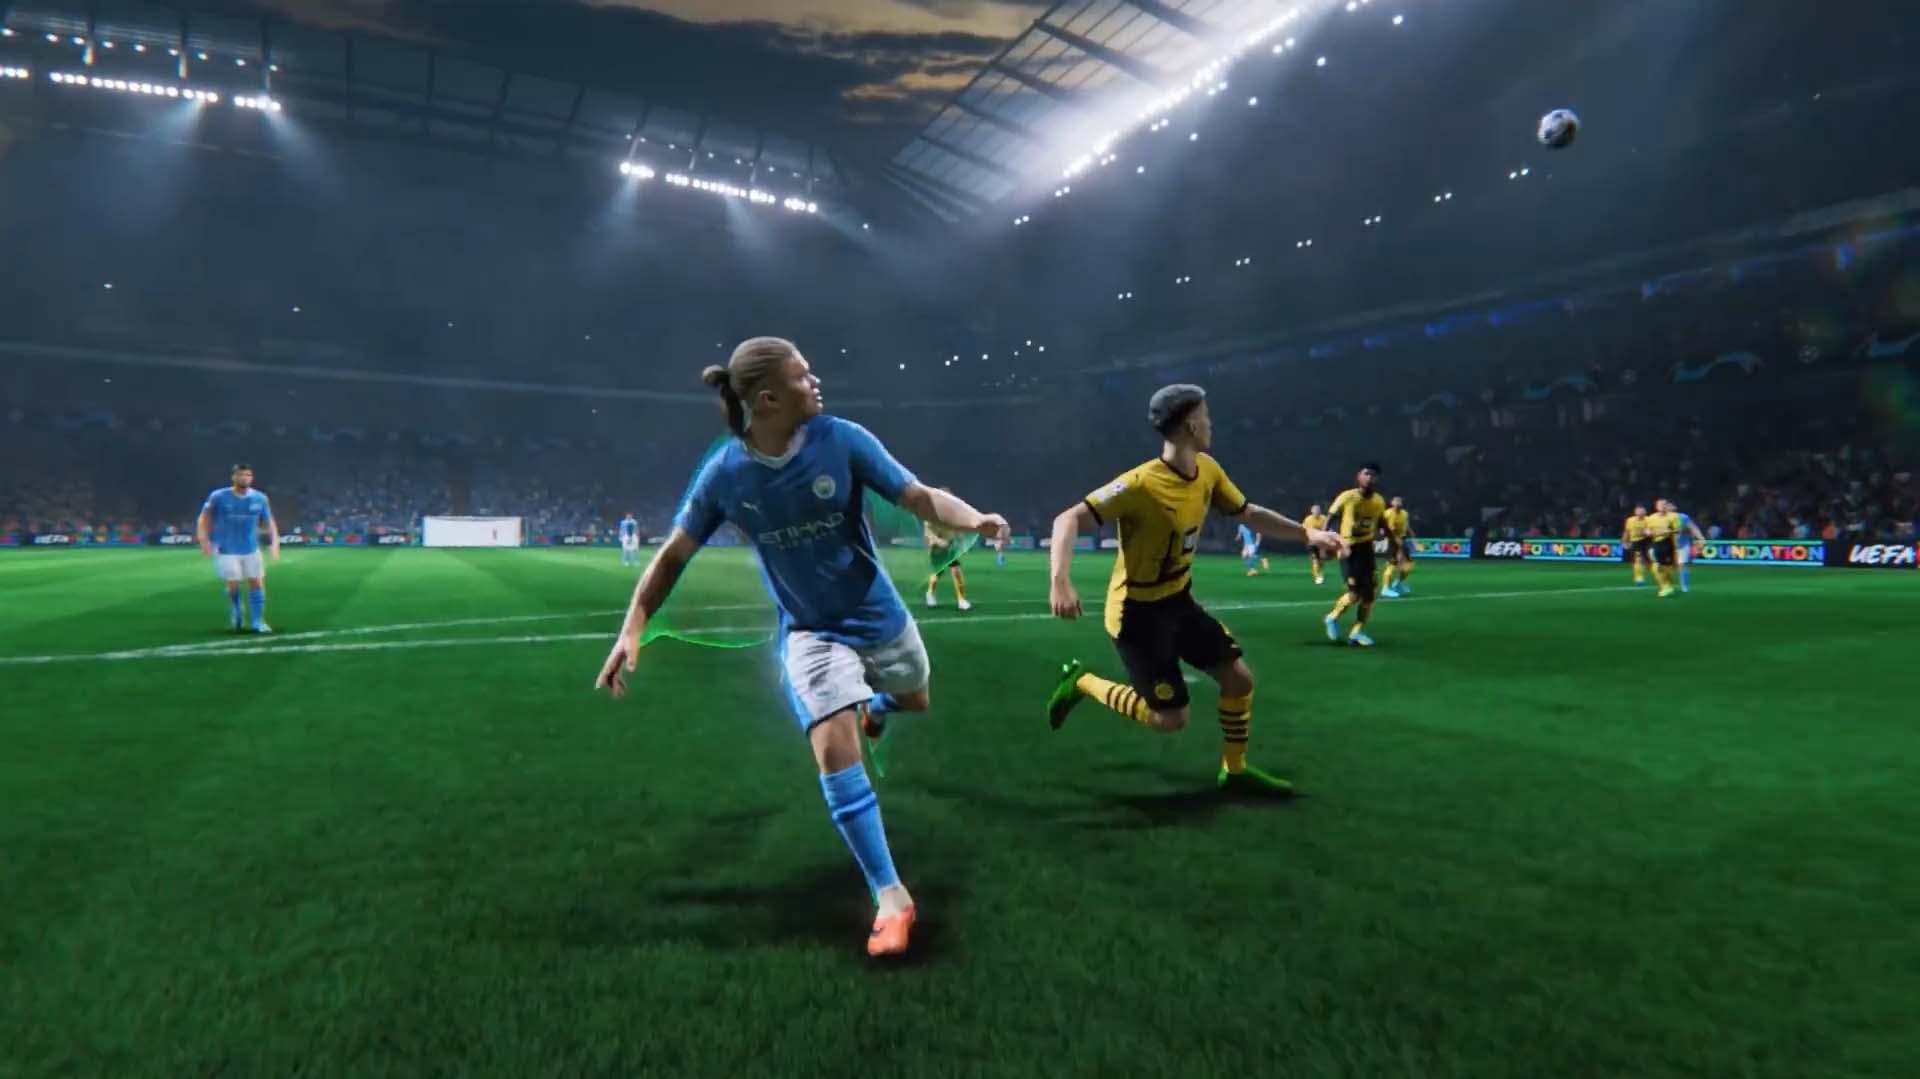 Ea Sports Fc Is Onto A Winner With Smart Additions And Small